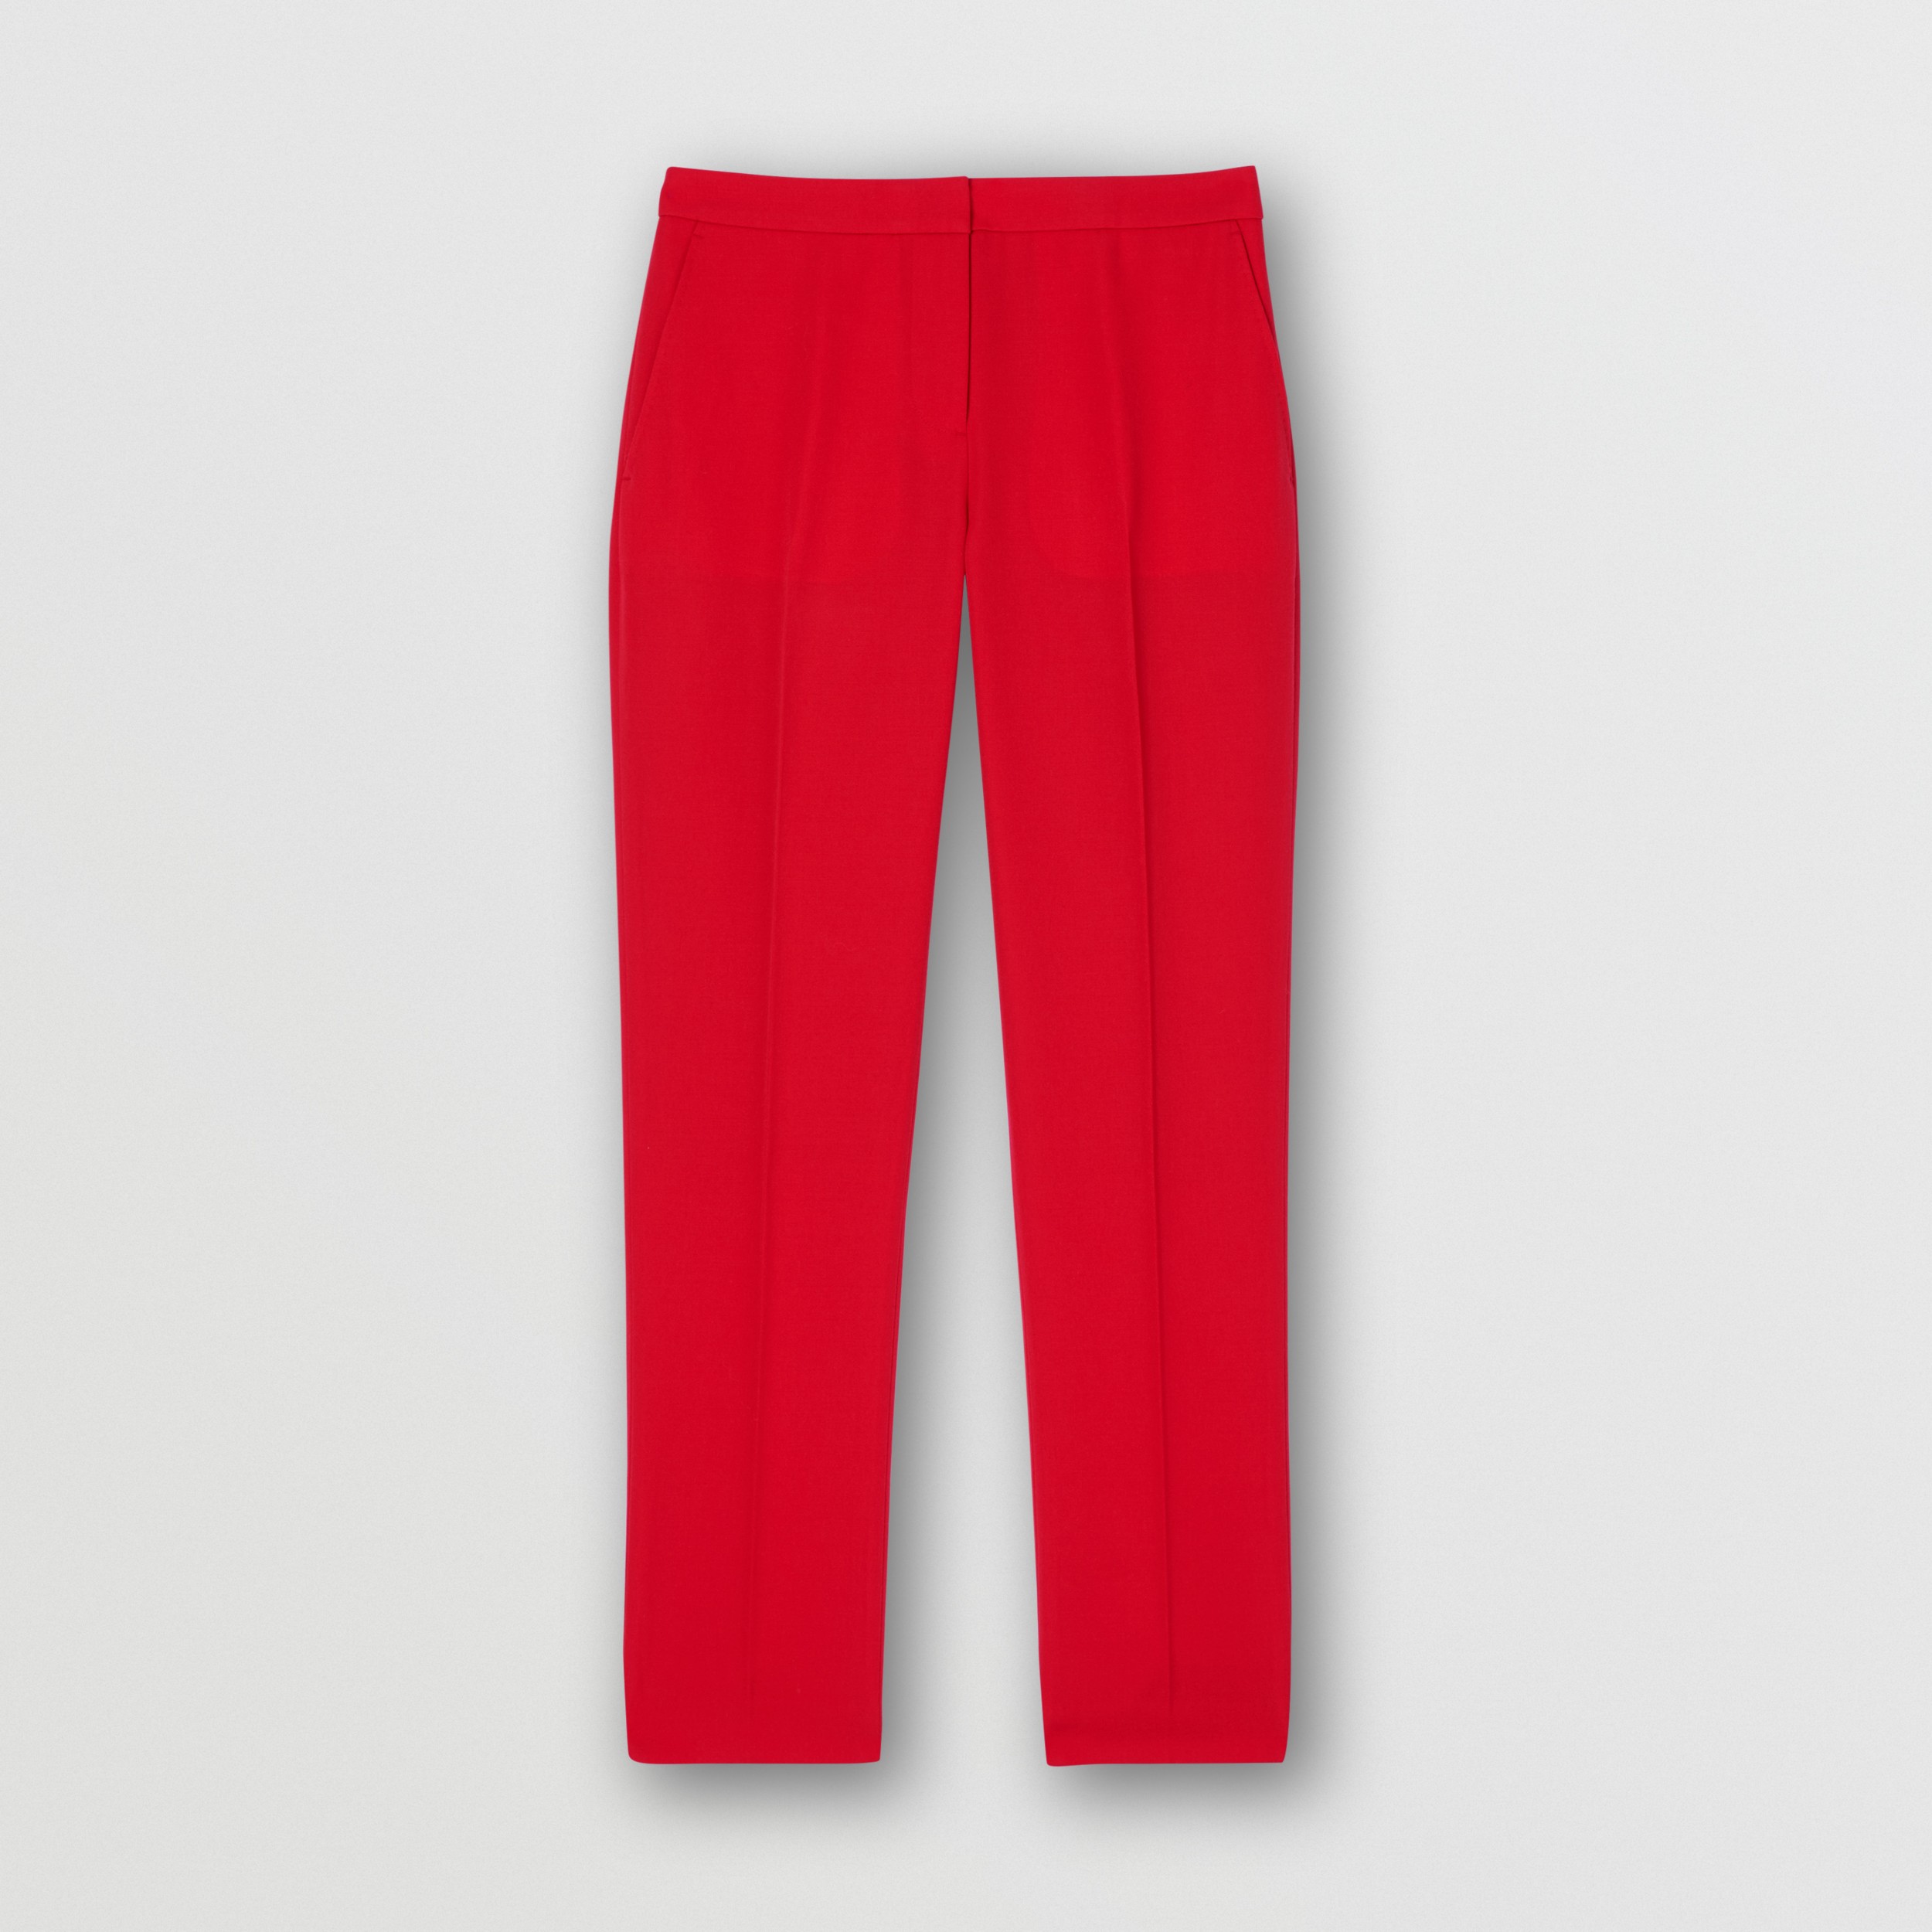 Wool Tailored Trousers in Bright Red - Women | Burberry United States